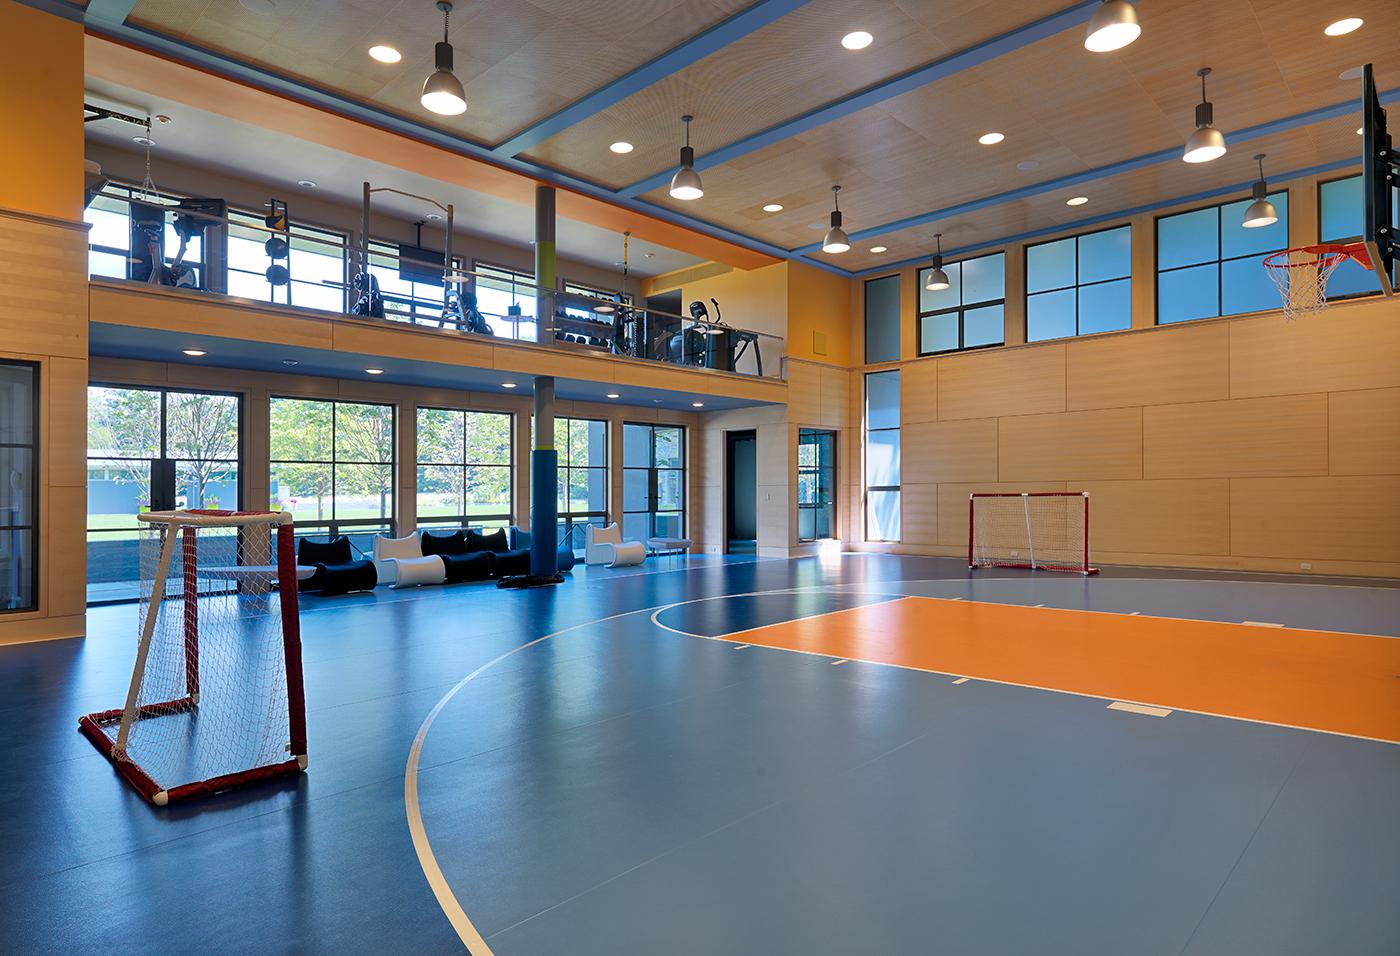 High-end indoor gym and basketball court